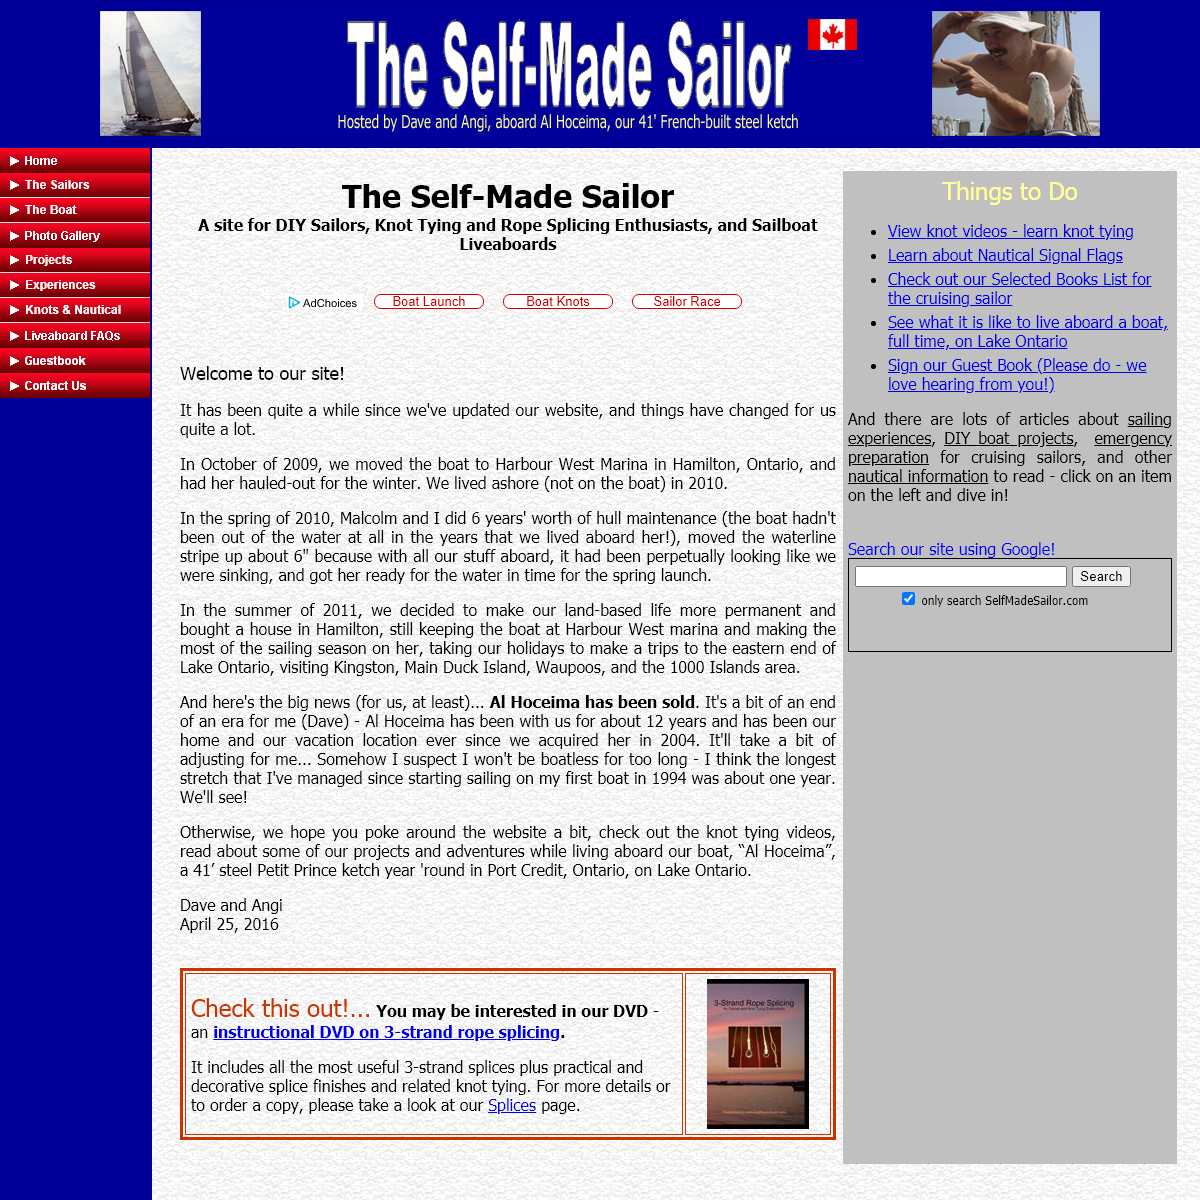 A complete backup of selfmadesailor.com